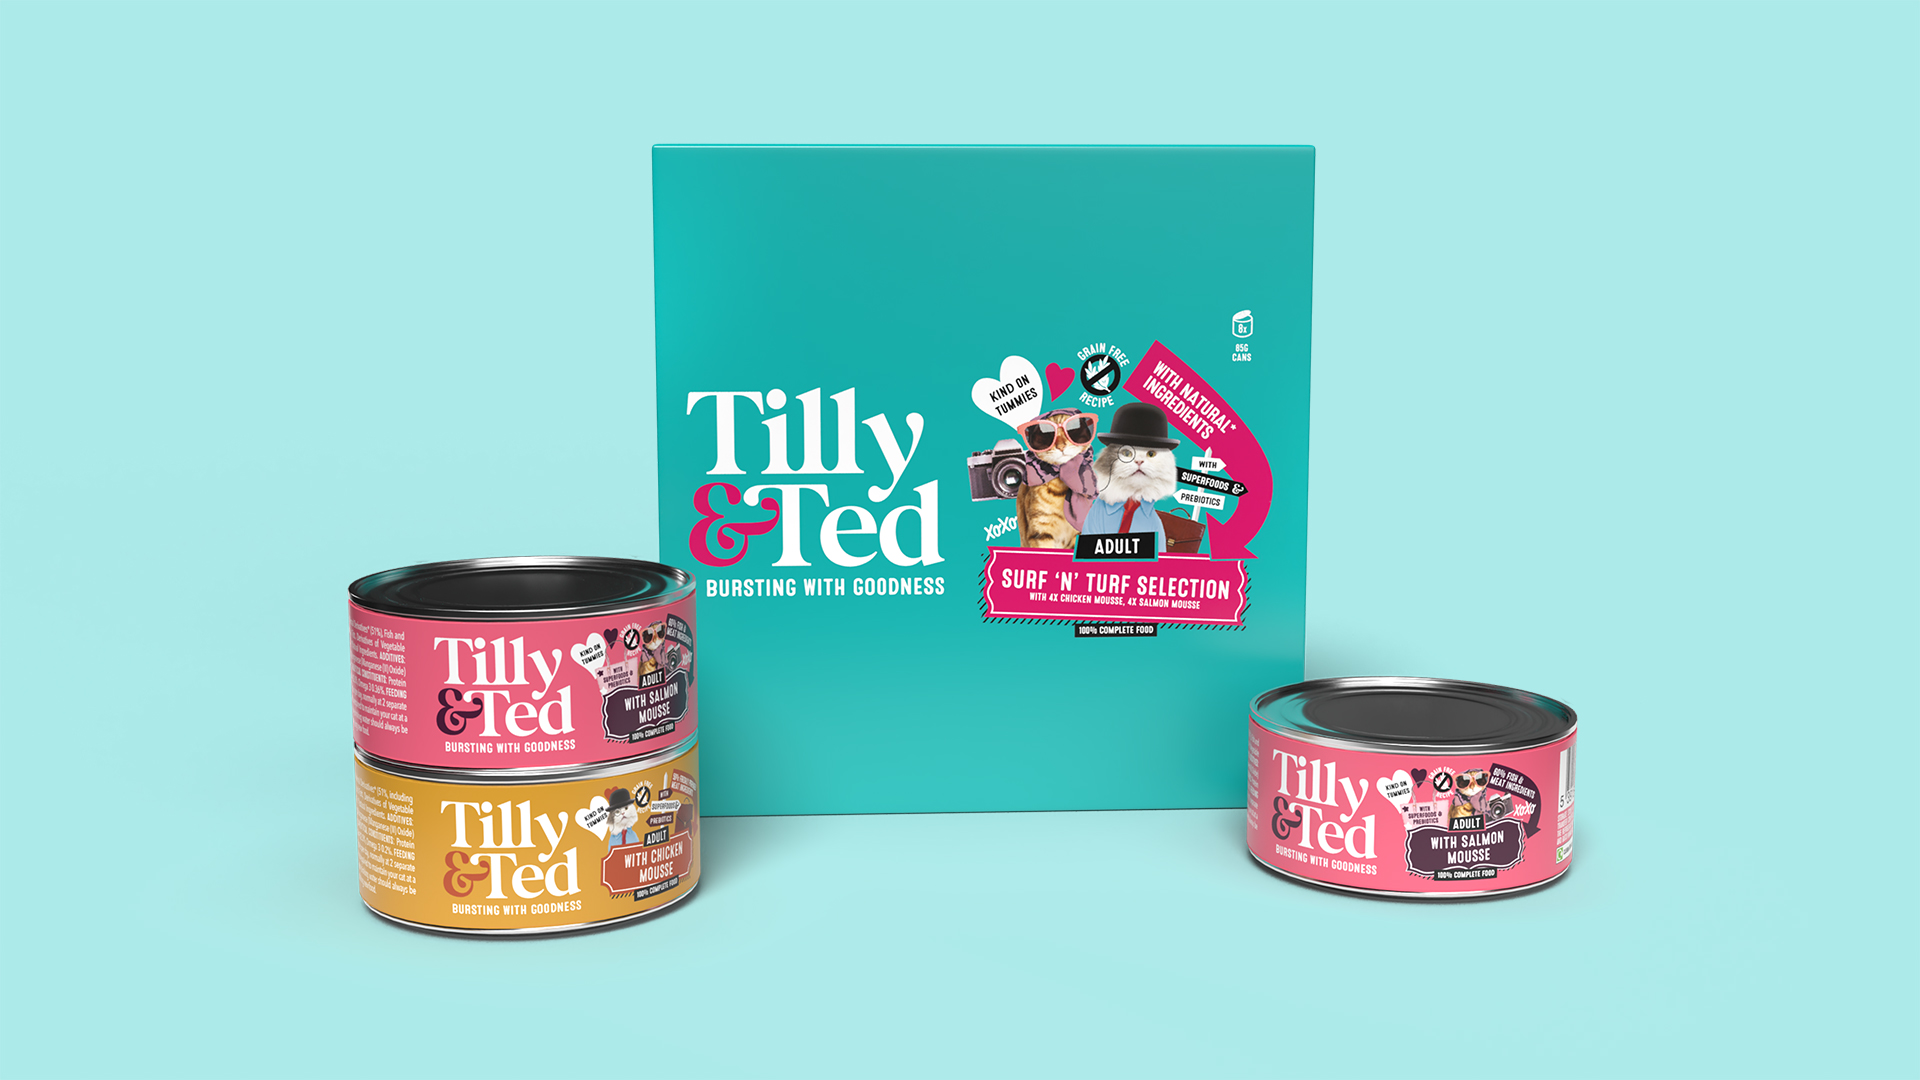 Slice Design's Unique and Playful Packaging for New Pet Food Brand Tilly & Ted